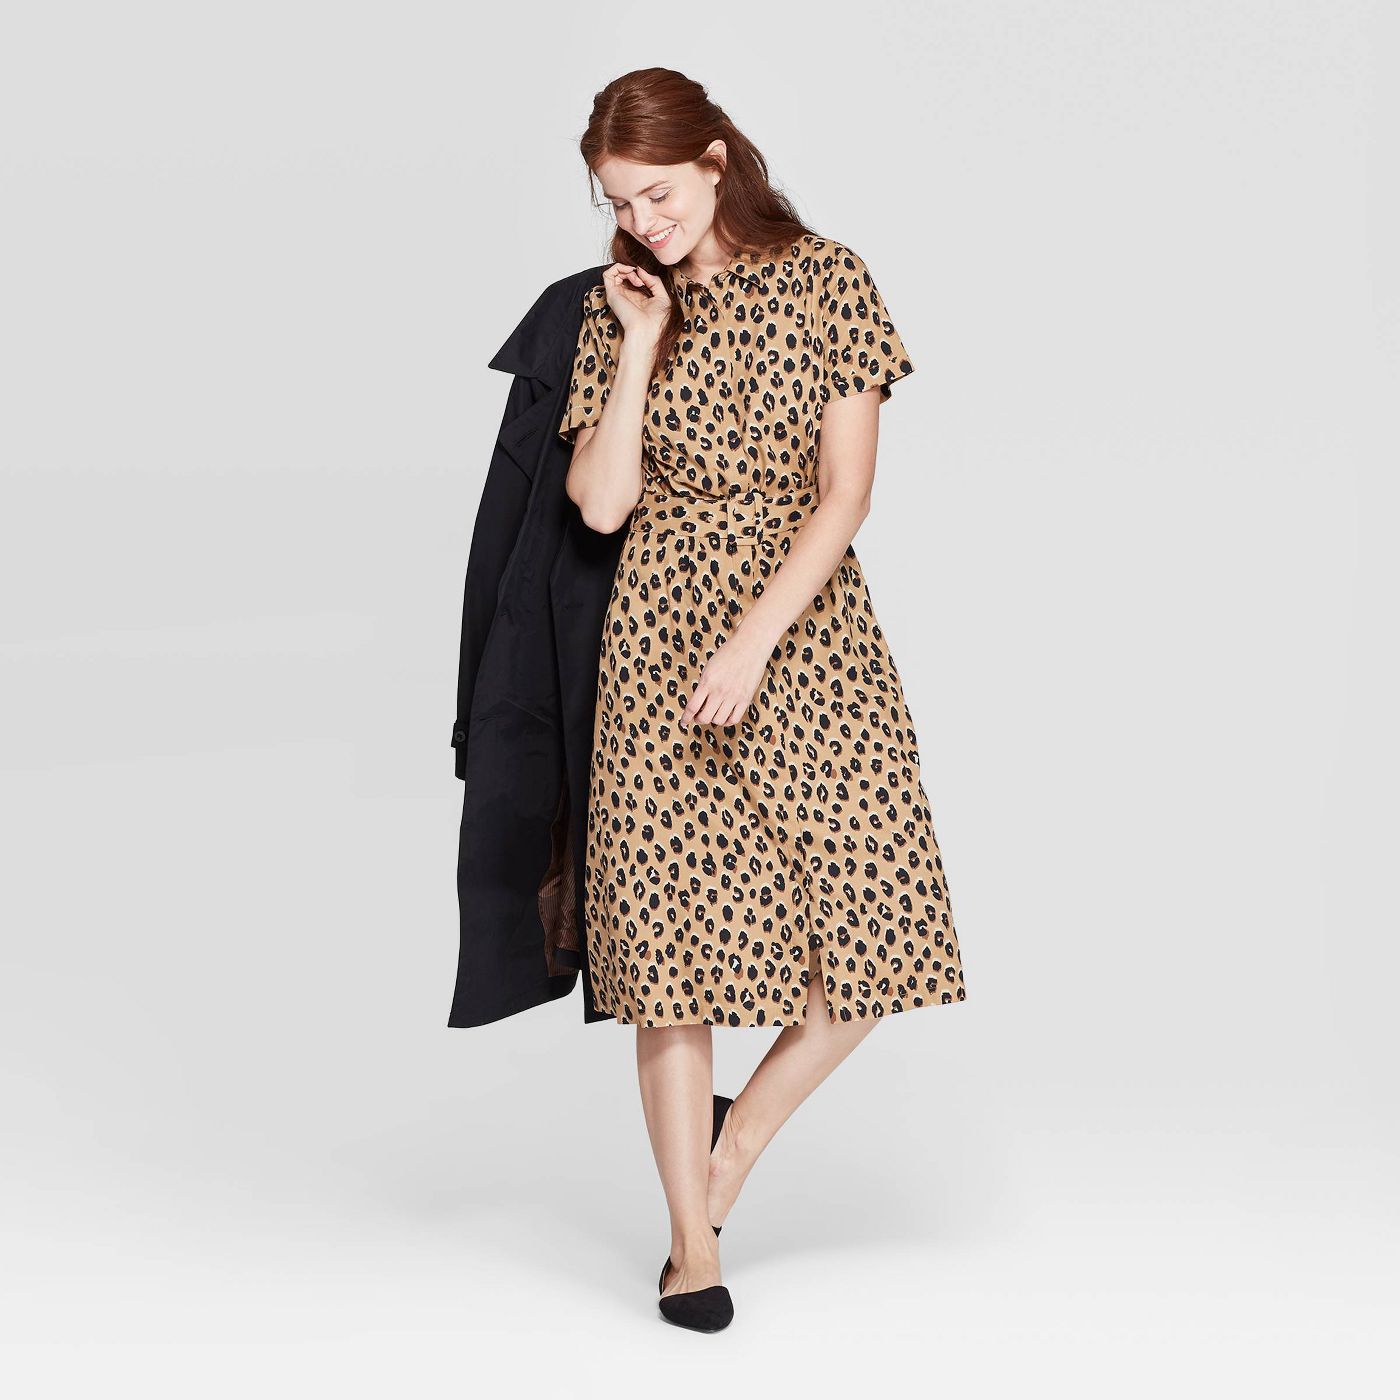 Women's Leopard Print Short Sleeve Collared Midi Shirtdress - A New Day™ Tan - image 1 of 3